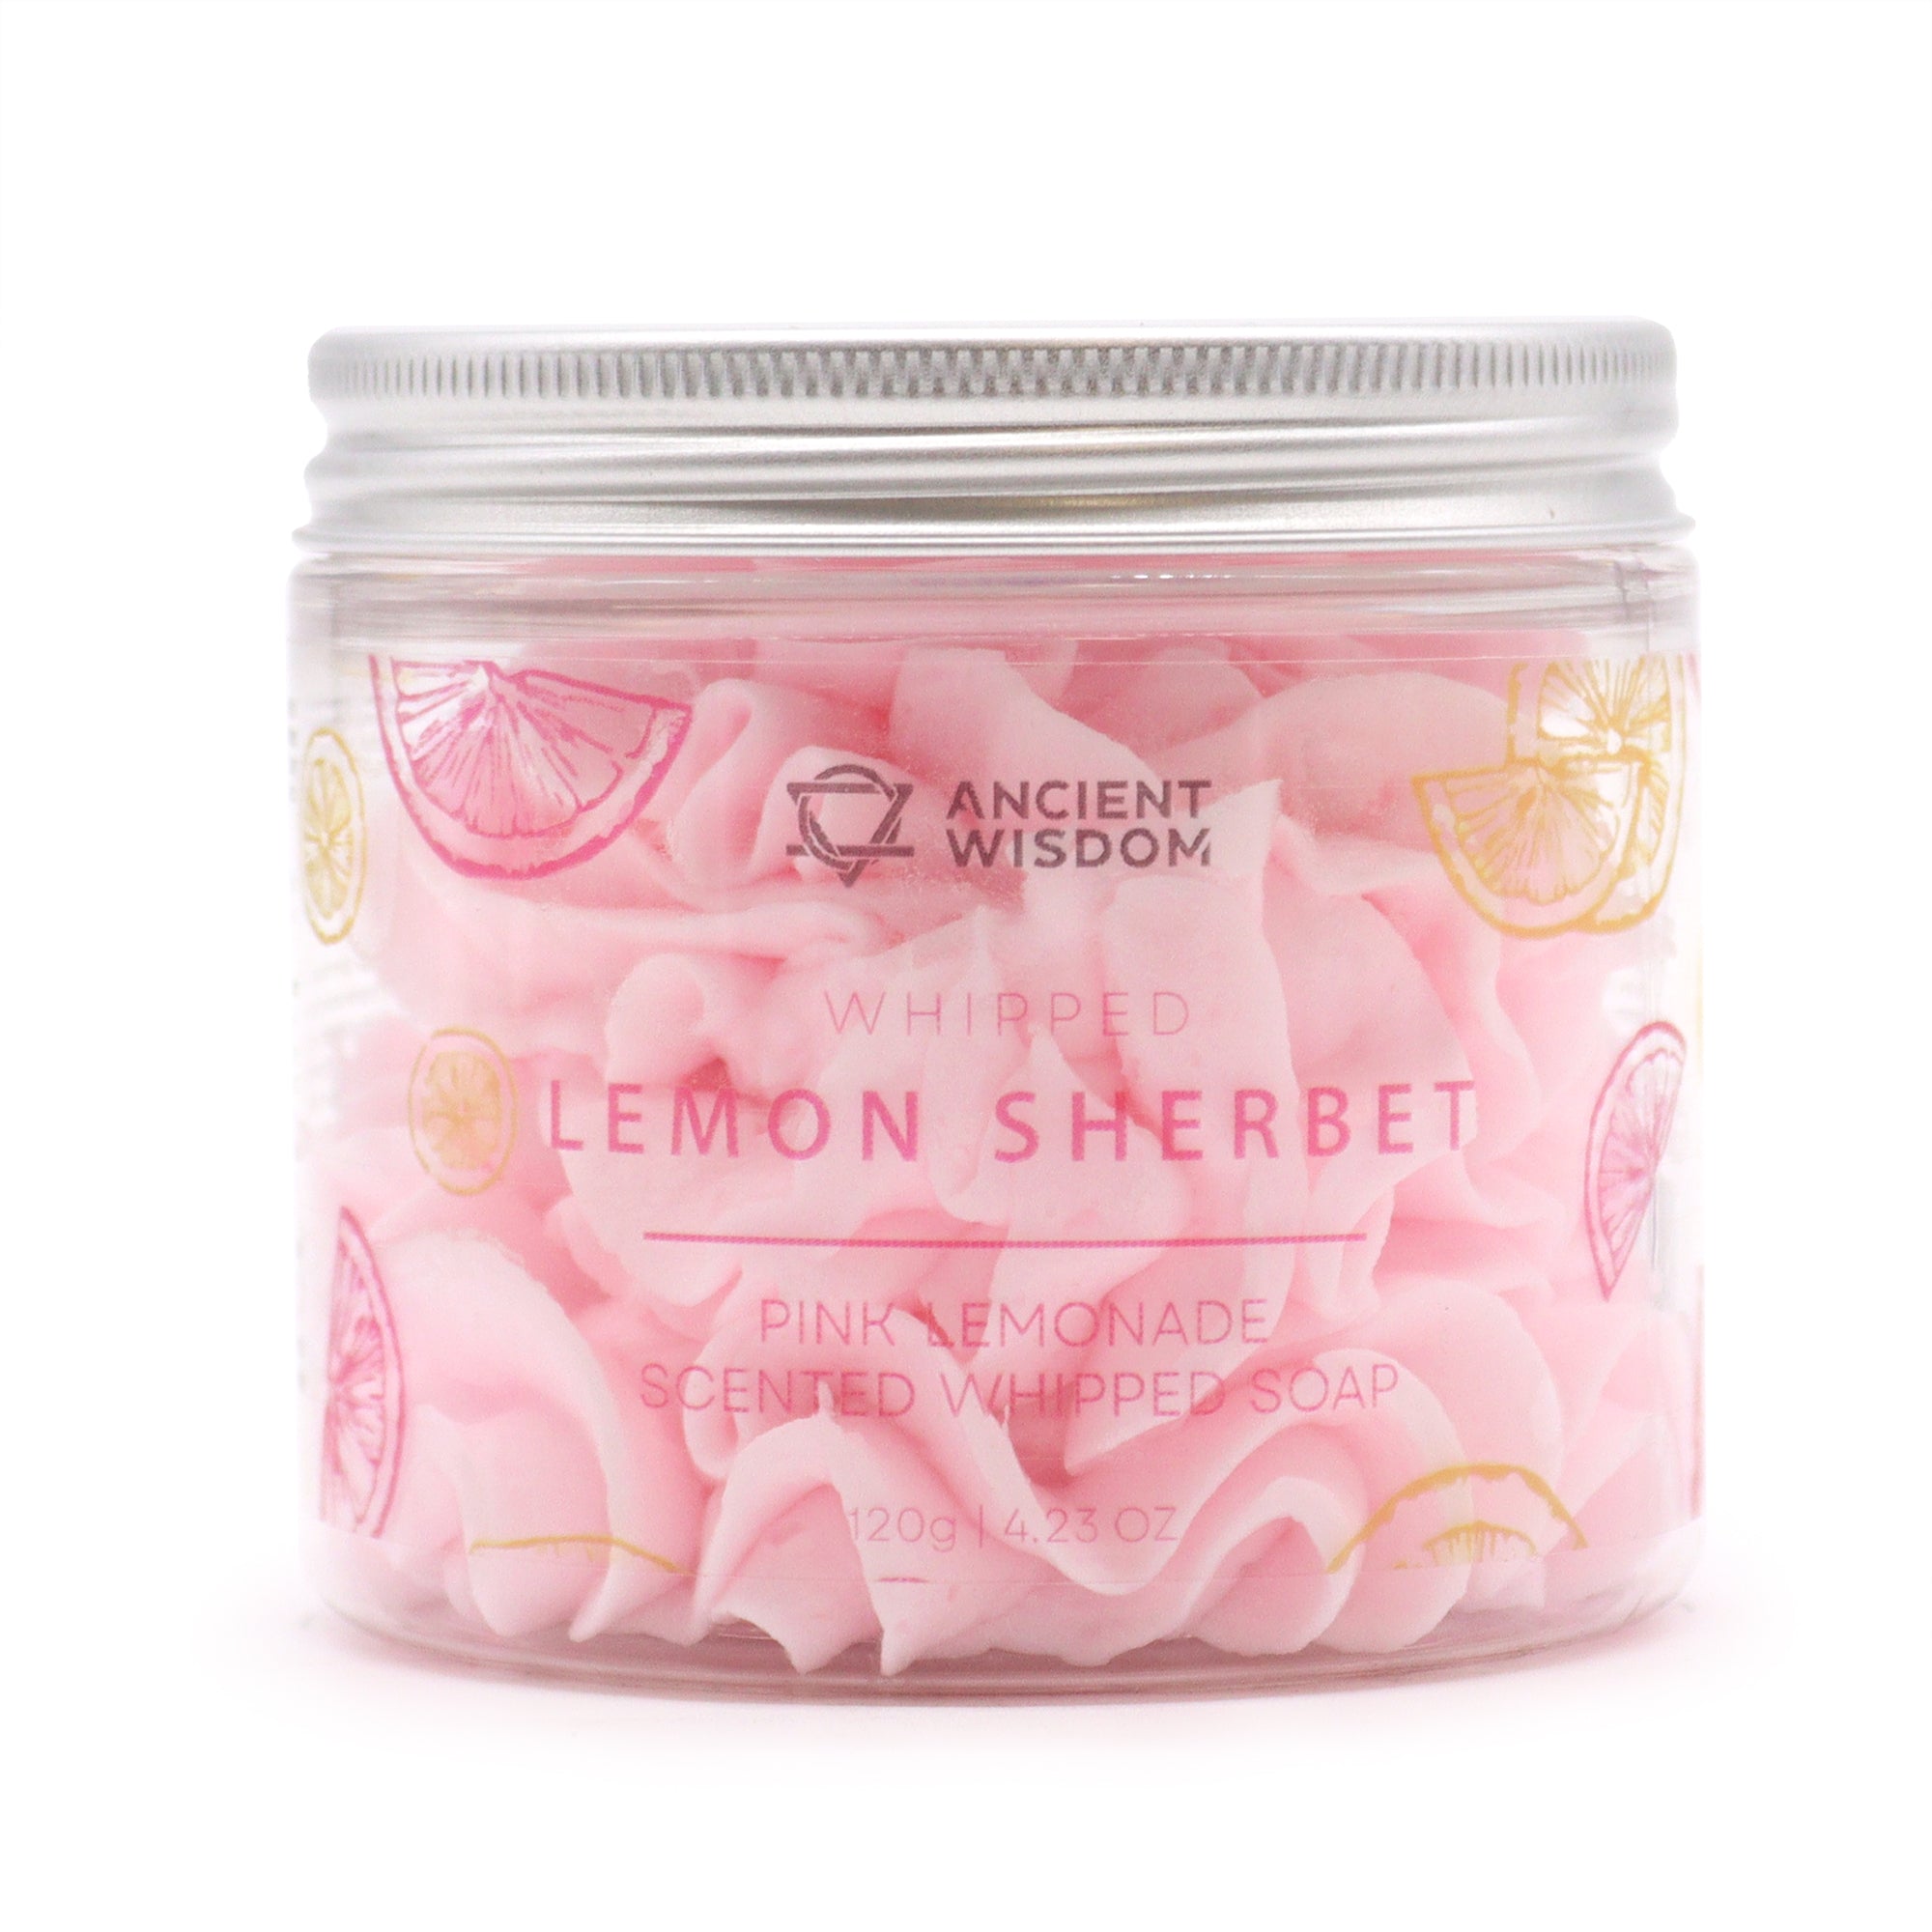 View Pink Lemonade Whipped Cream Soap 120g information